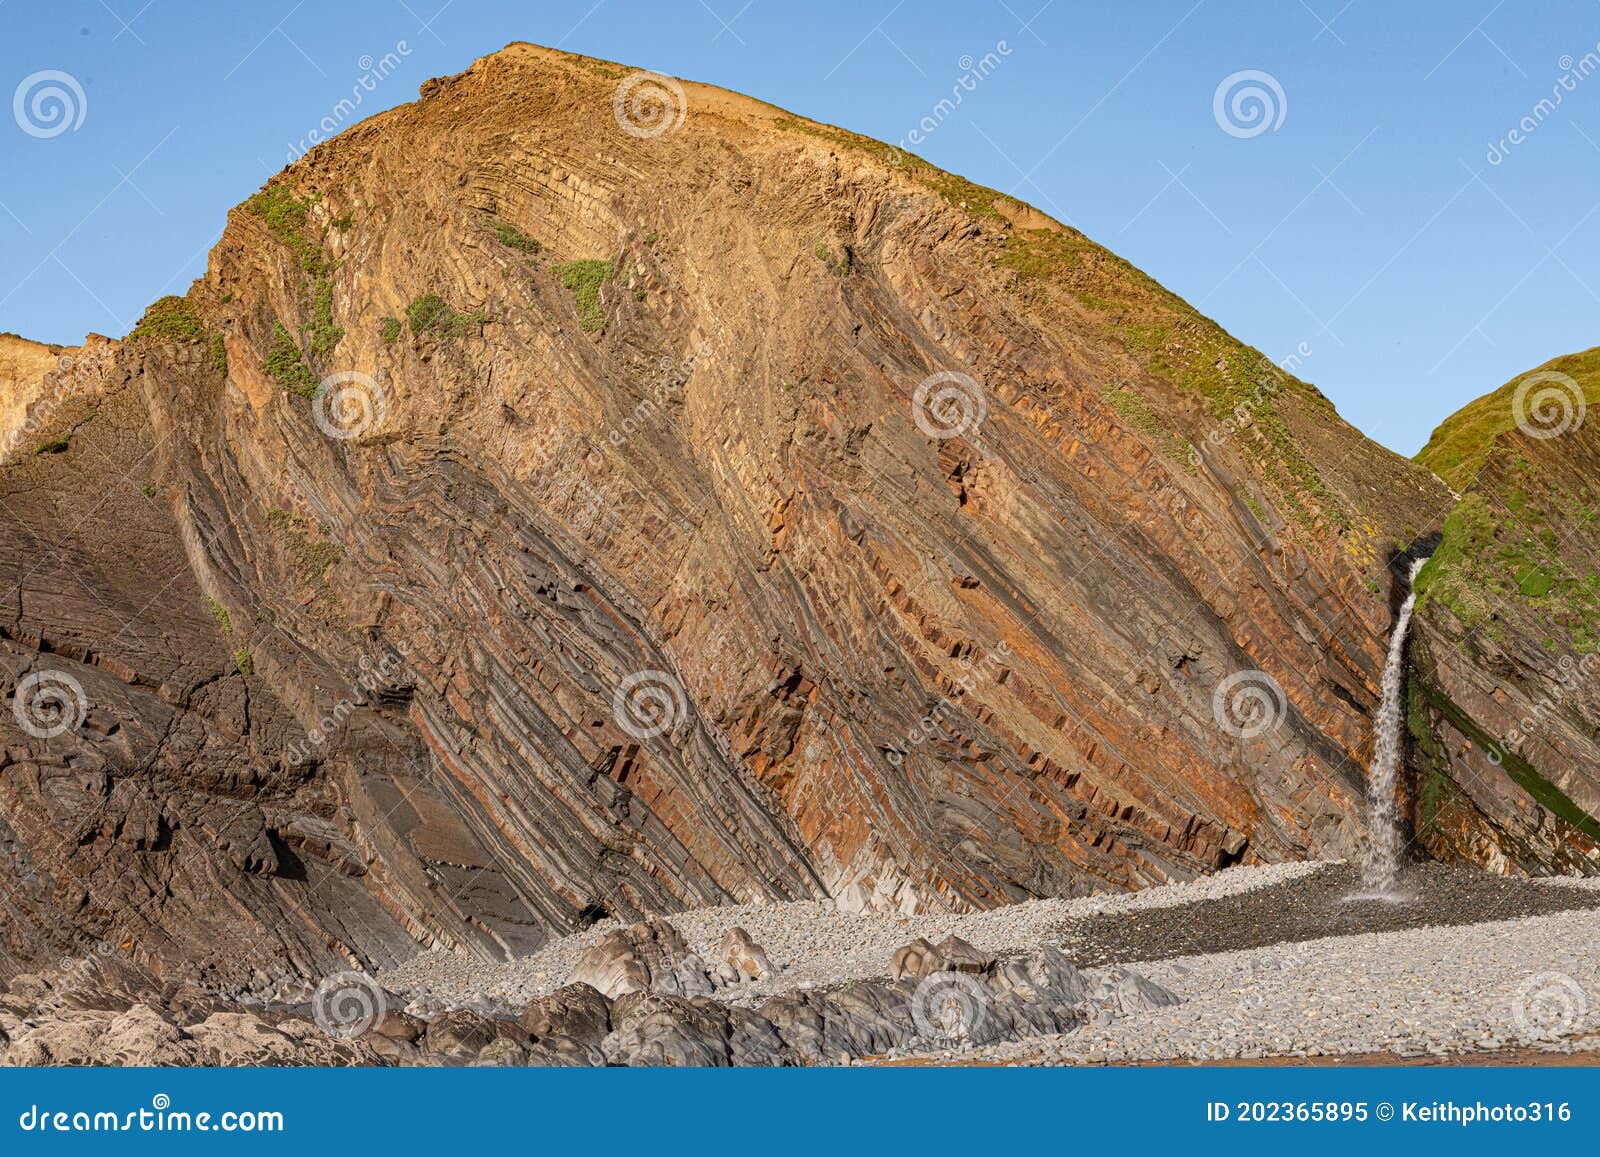 cliff side showing dipping sedimentary rocks